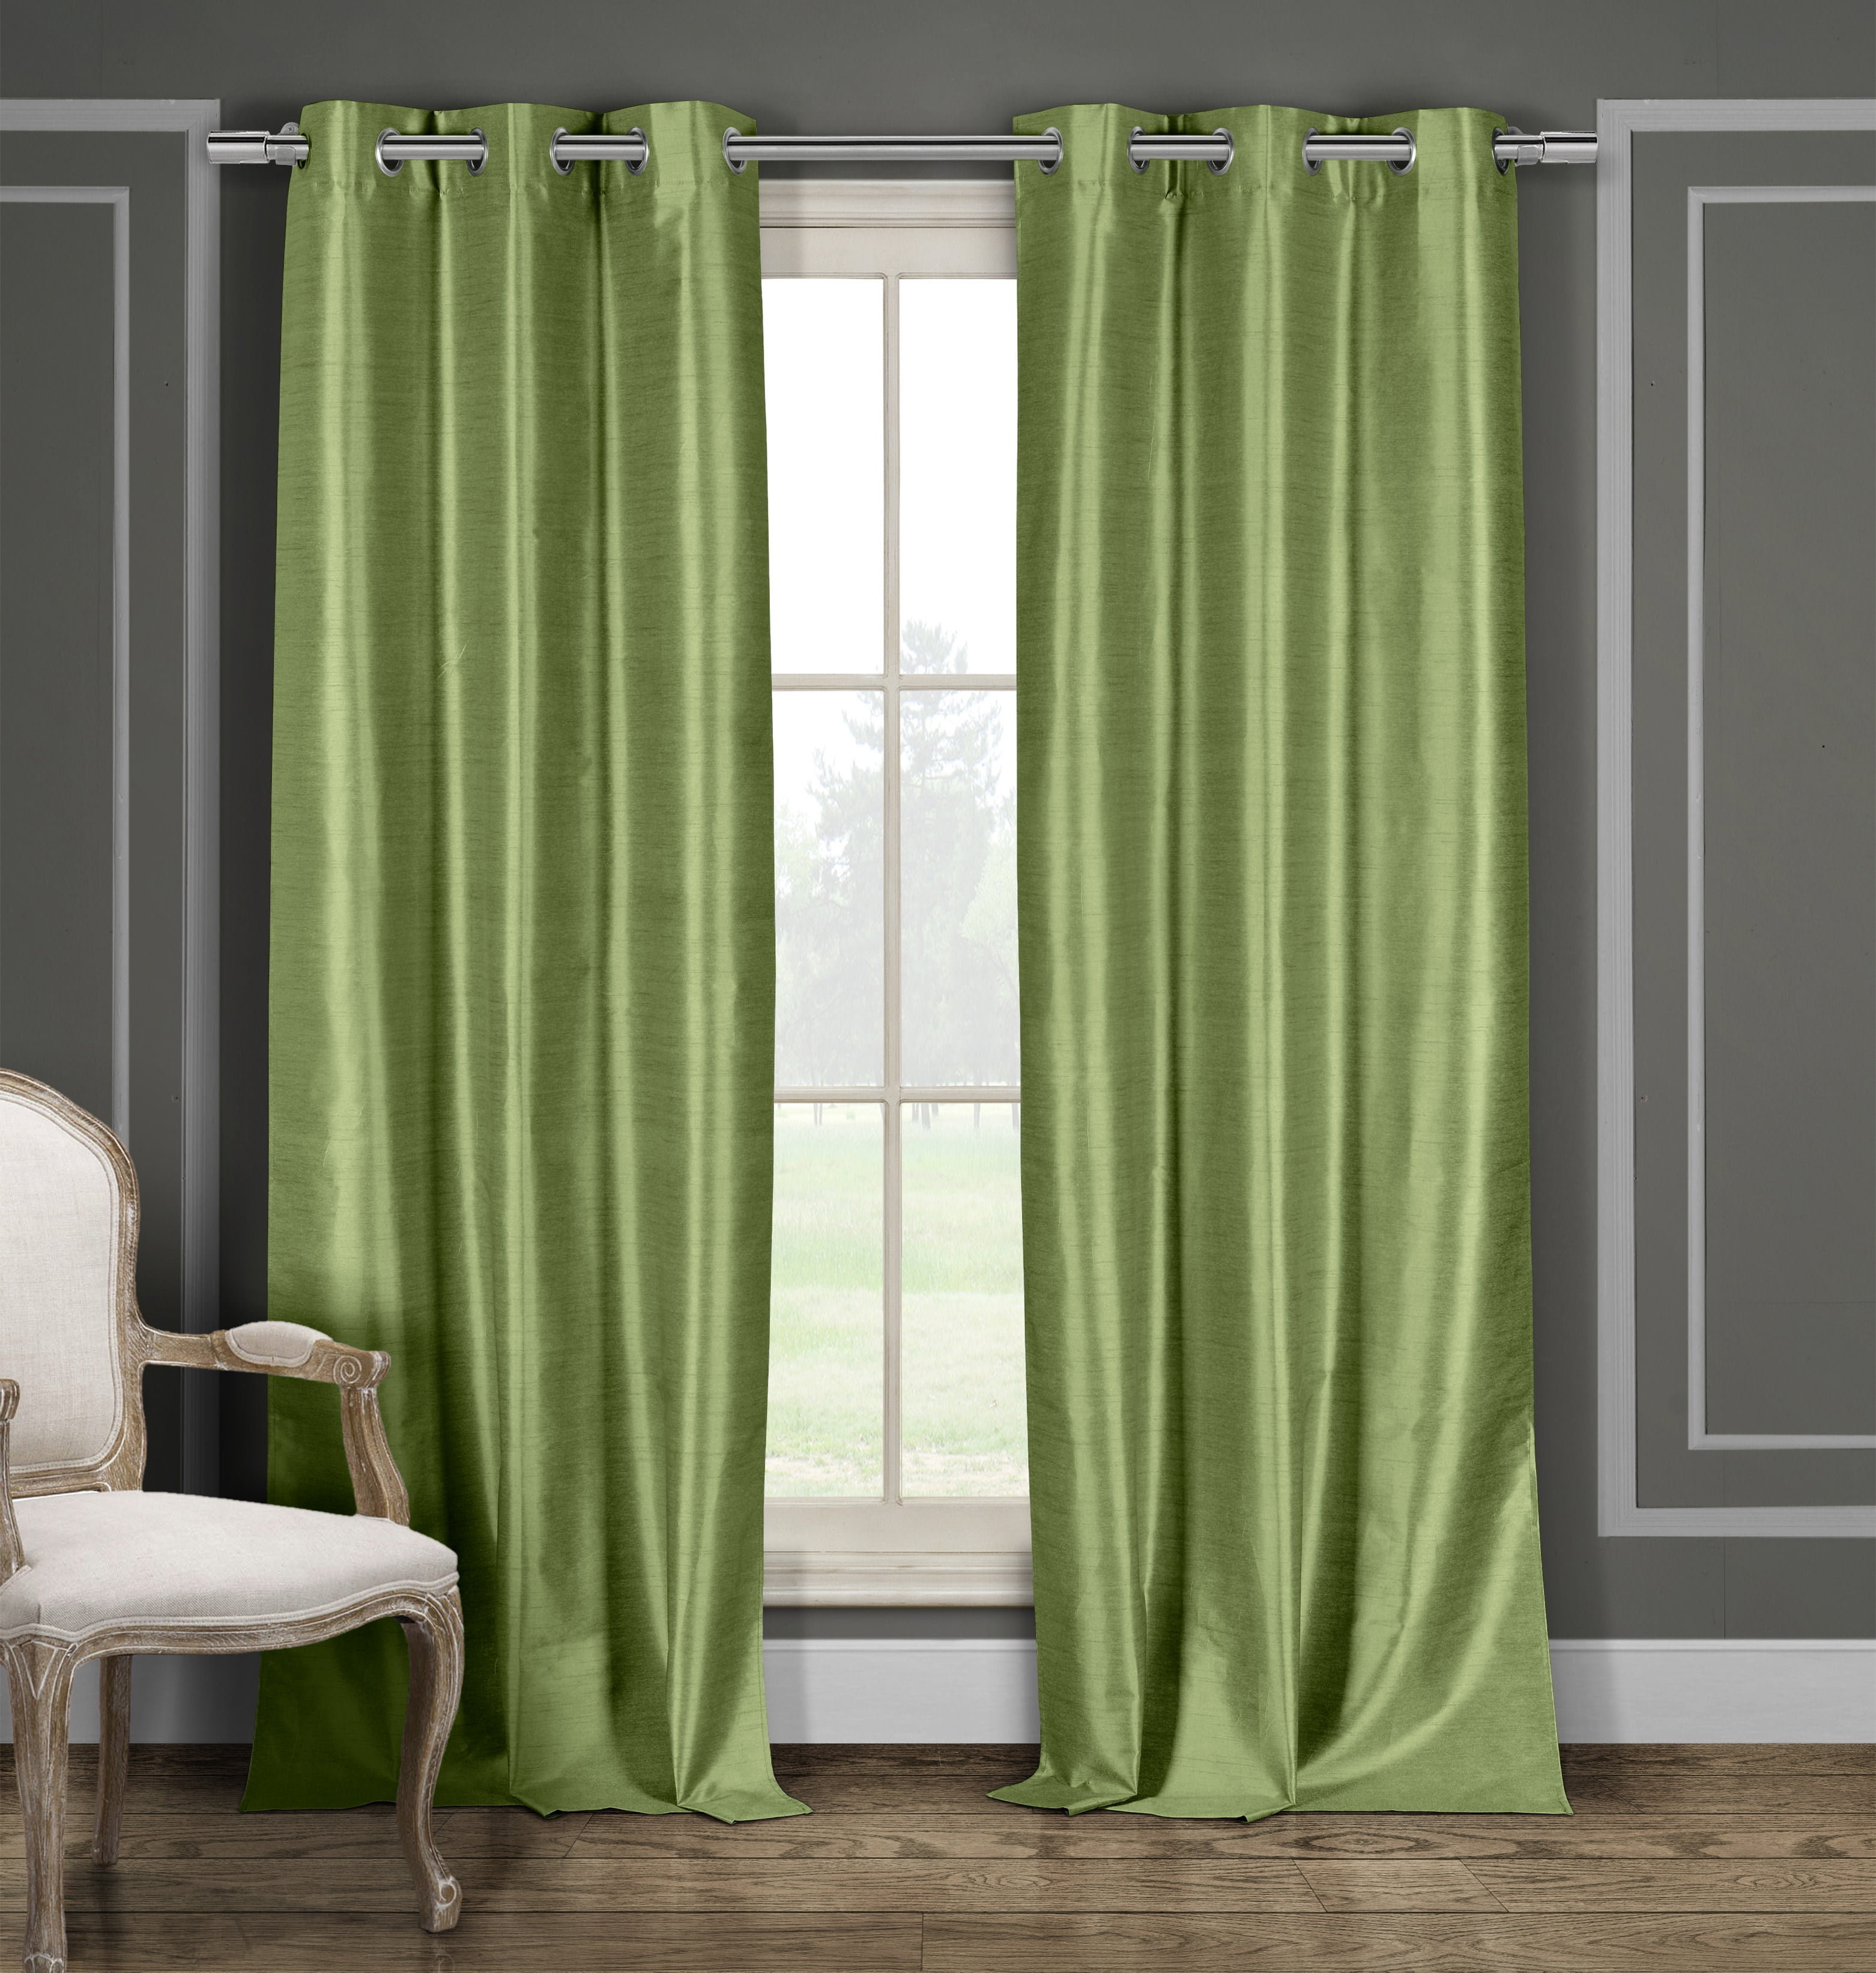 Daenerys Solid Thermal Insulated Blackout Curtain Set - Walmart.com